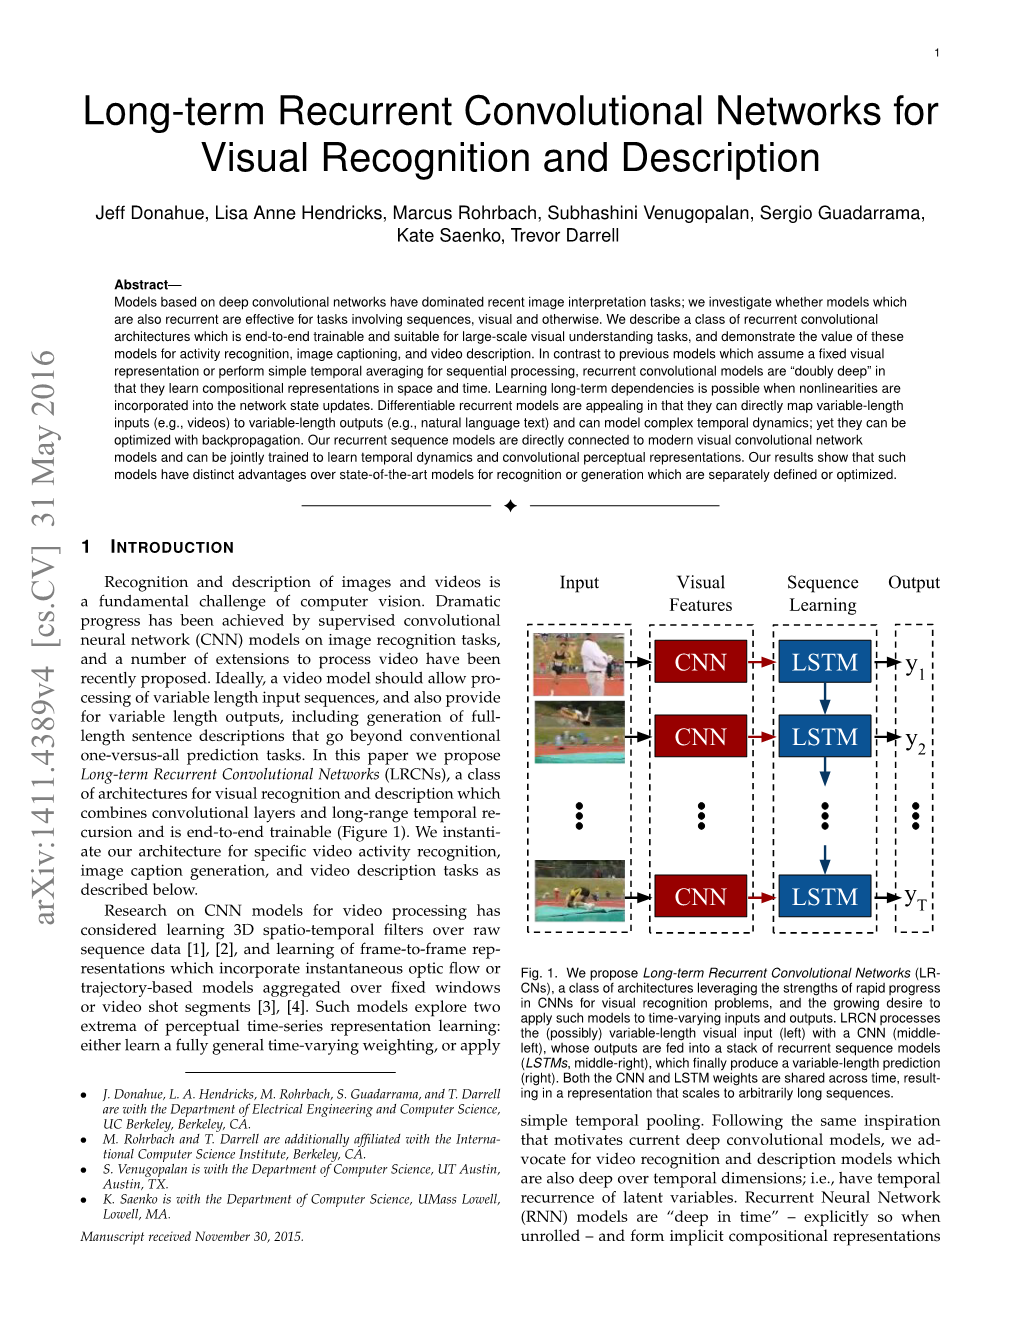 Long-Term Recurrent Convolutional Networks for Visual Recognition and Description